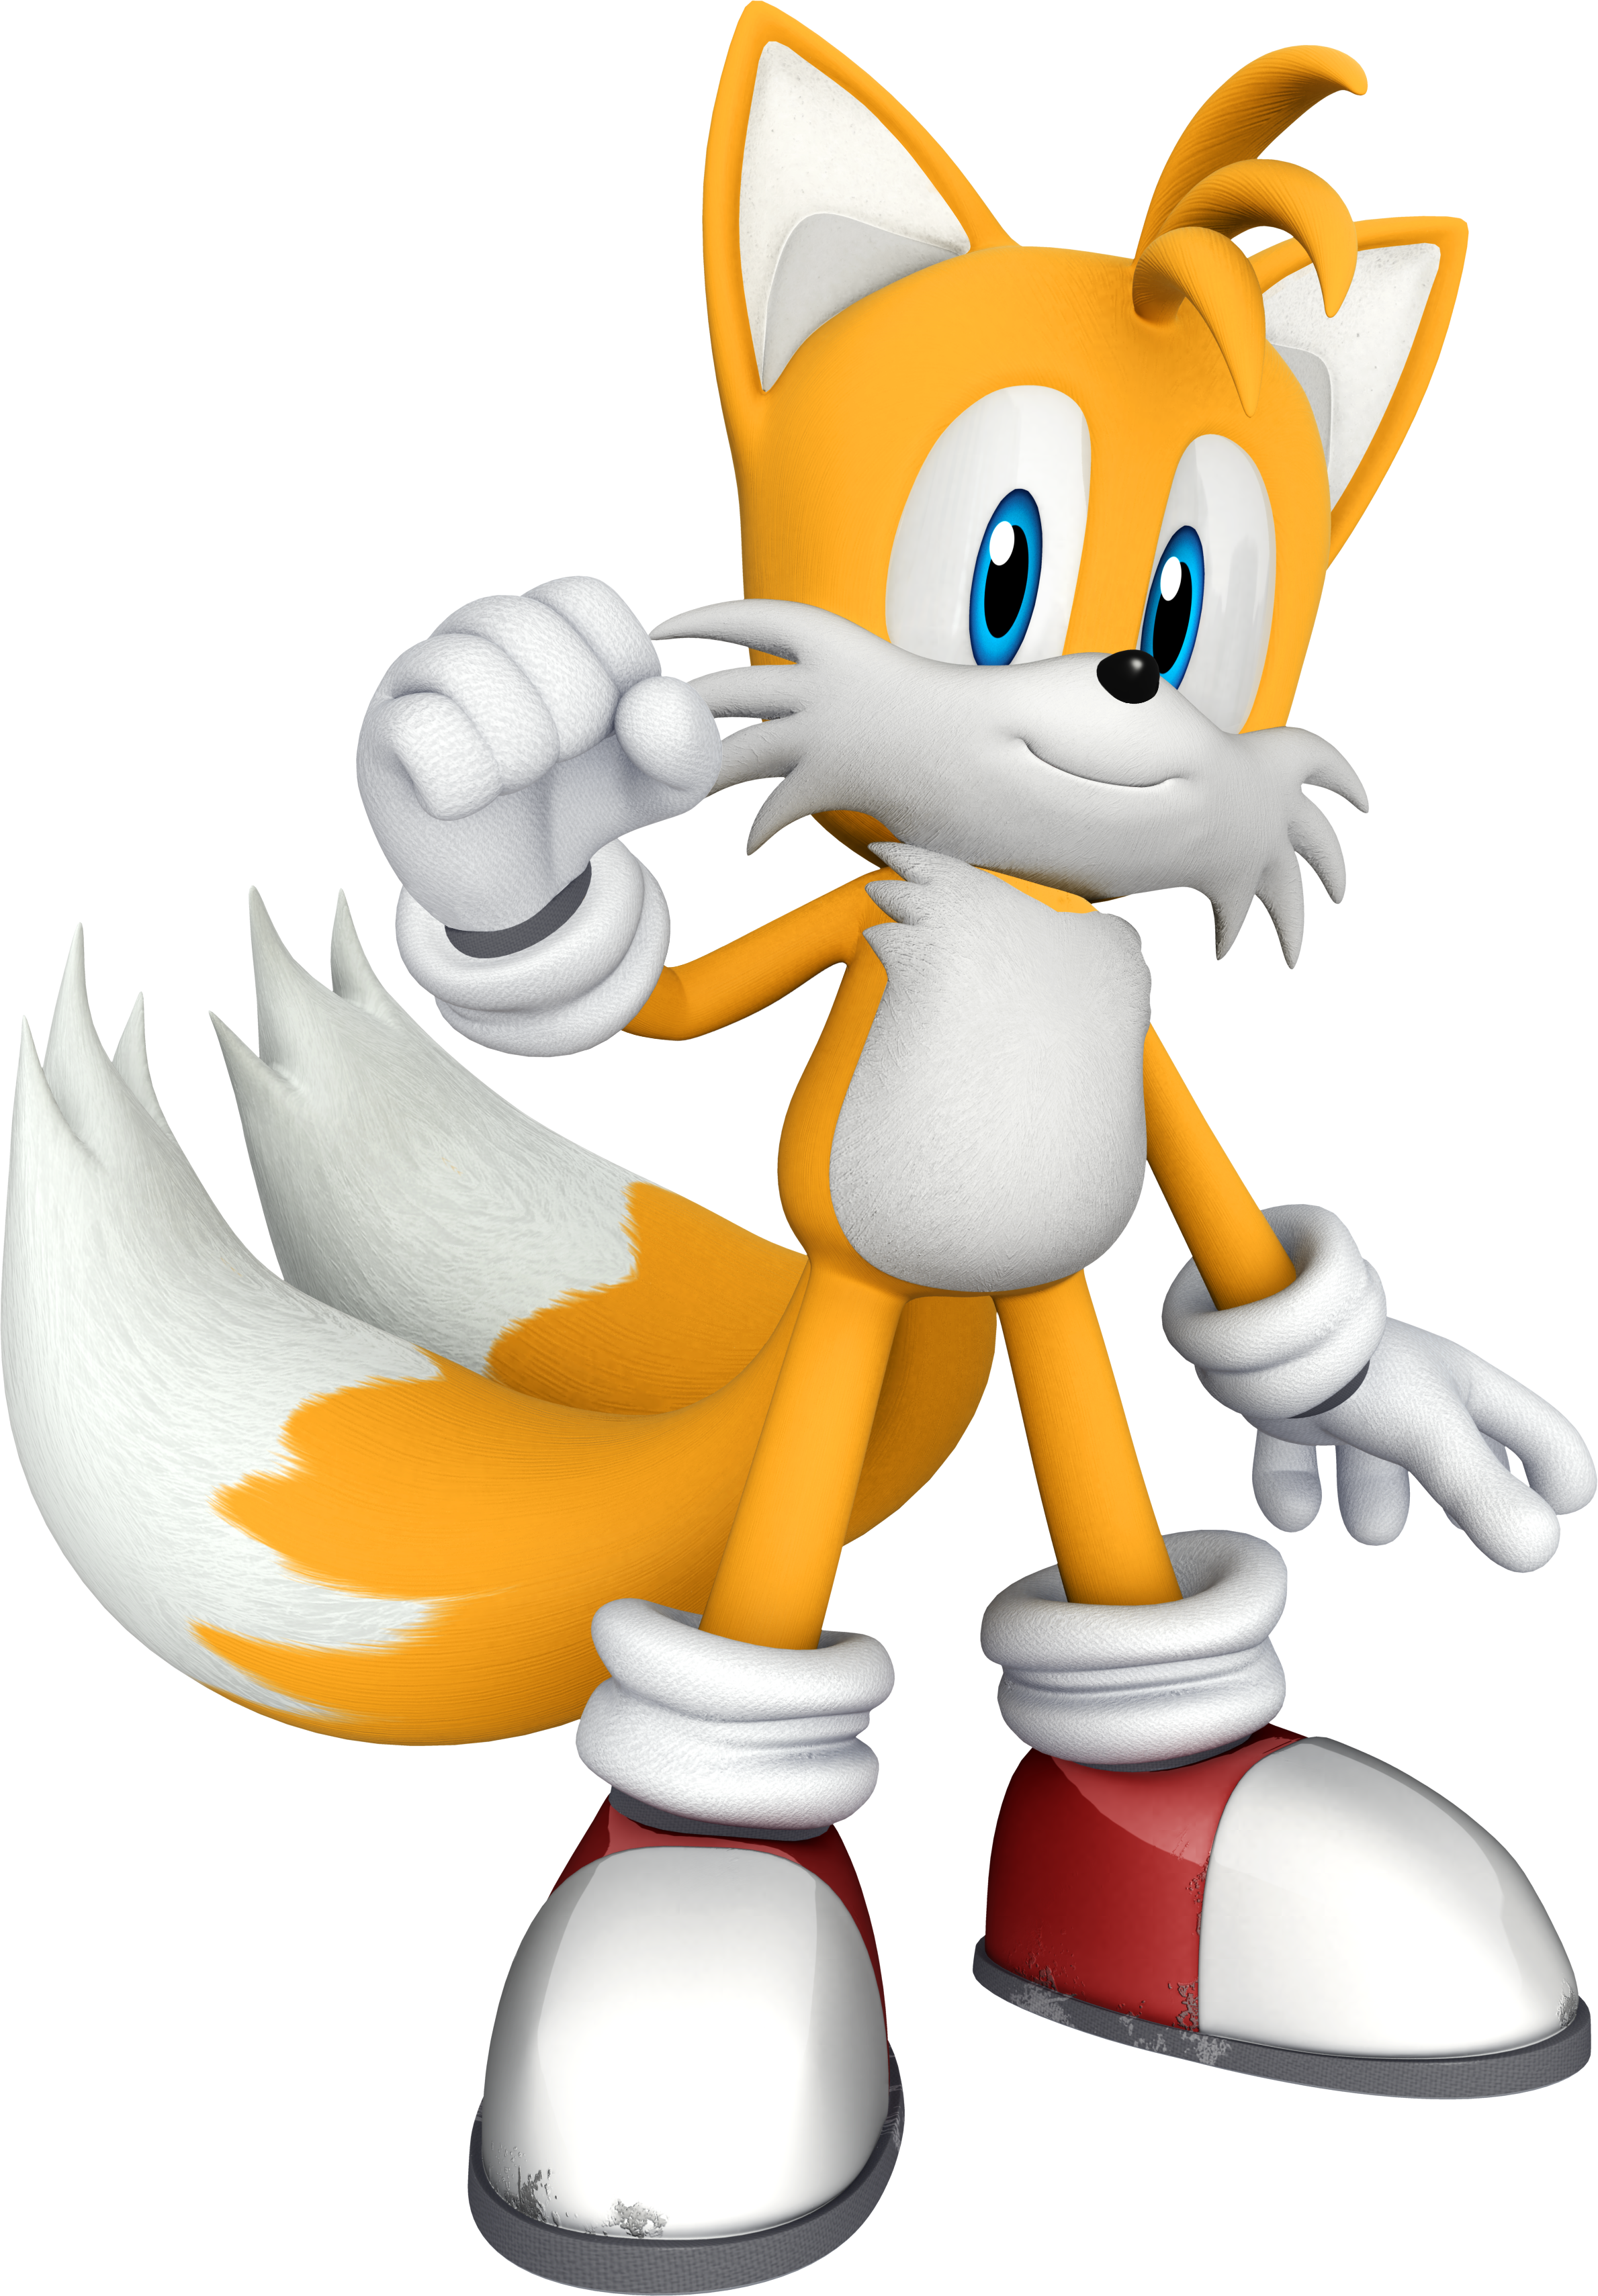 http://images2.wikia.nocookie.net/__cb20130107092959/sonic/images/b/b8/Tailsracingbigfilesizesharpecolor.png